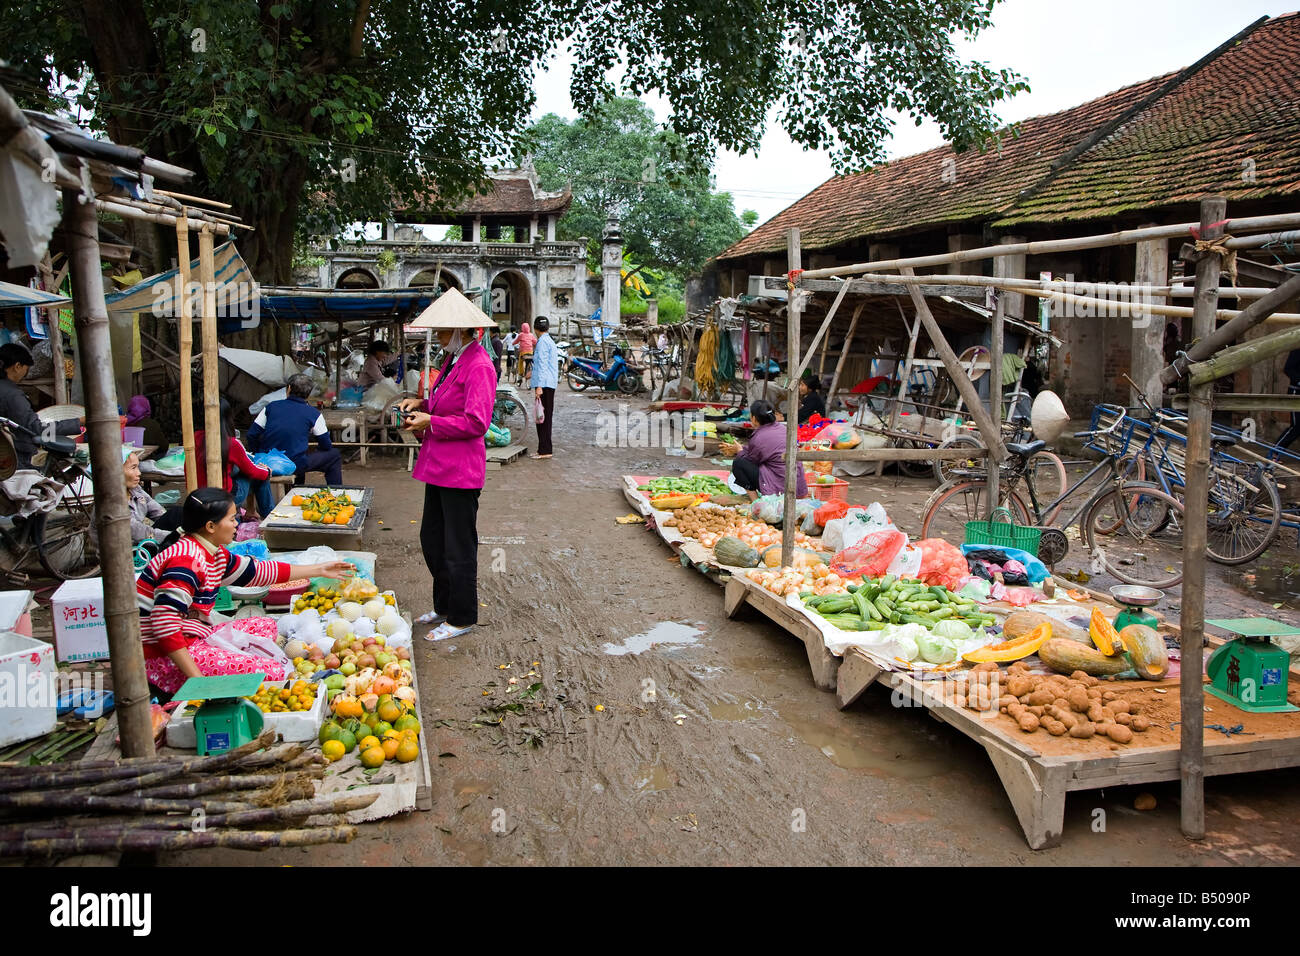 https://c8.alamy.com/comp/B5090P/view-of-an-old-traditional-village-market-B5090P.jpg